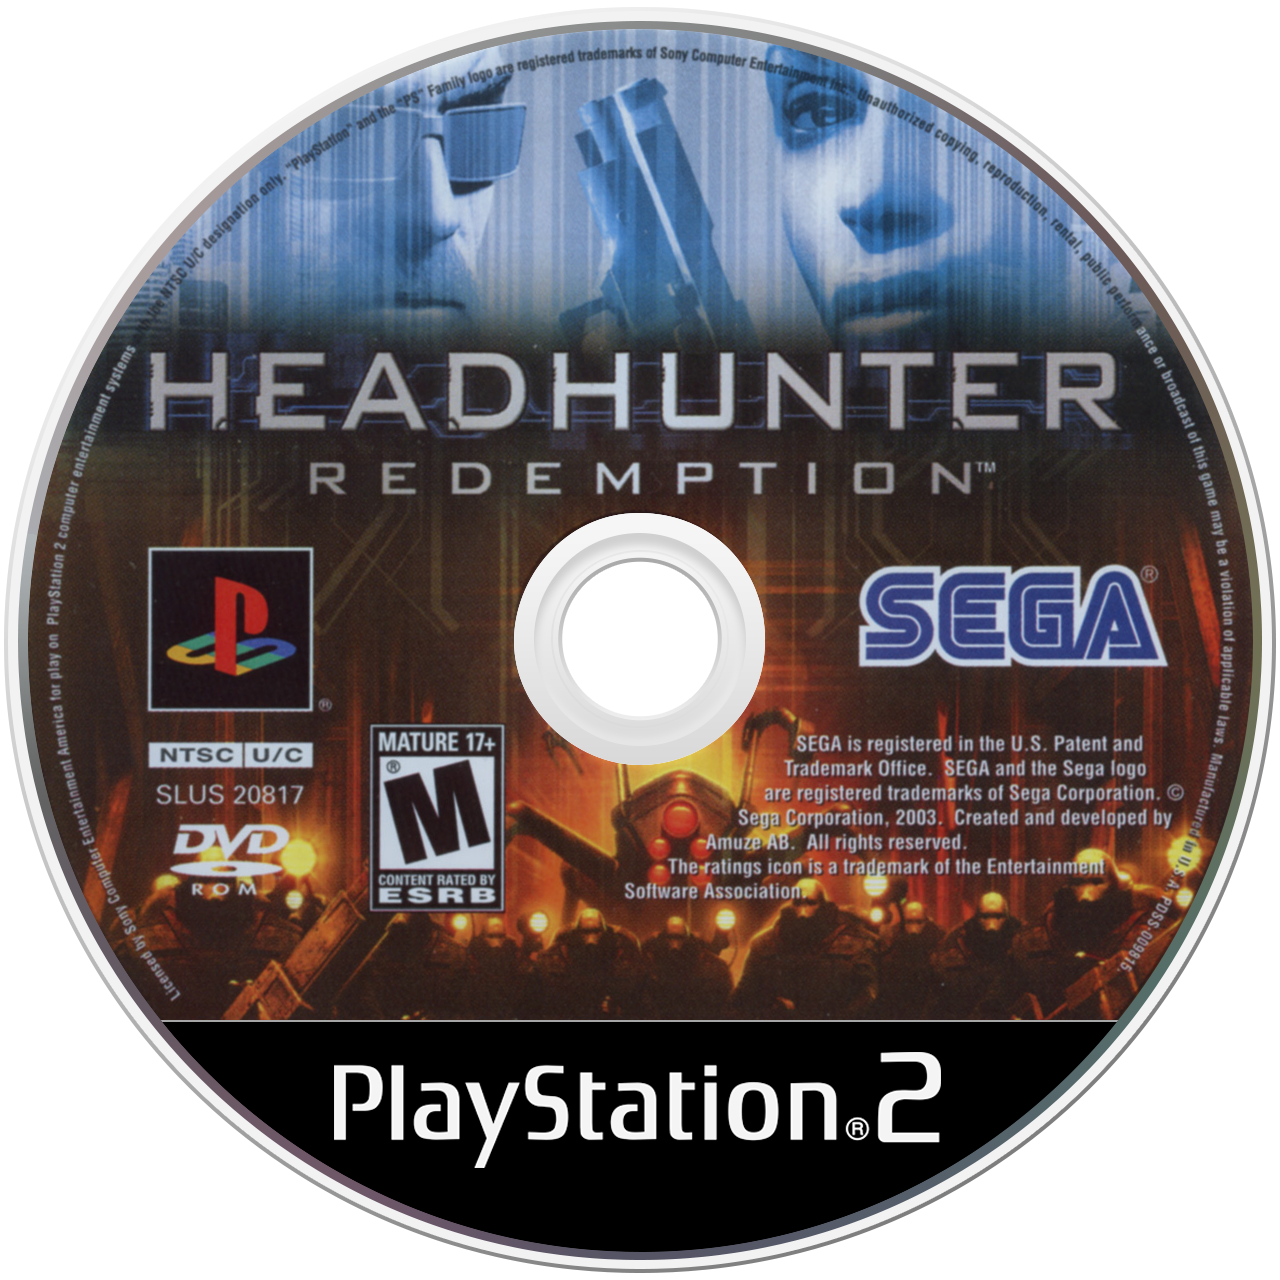 Headhunter: Redemption - PlayStation 2 (PS2) Game